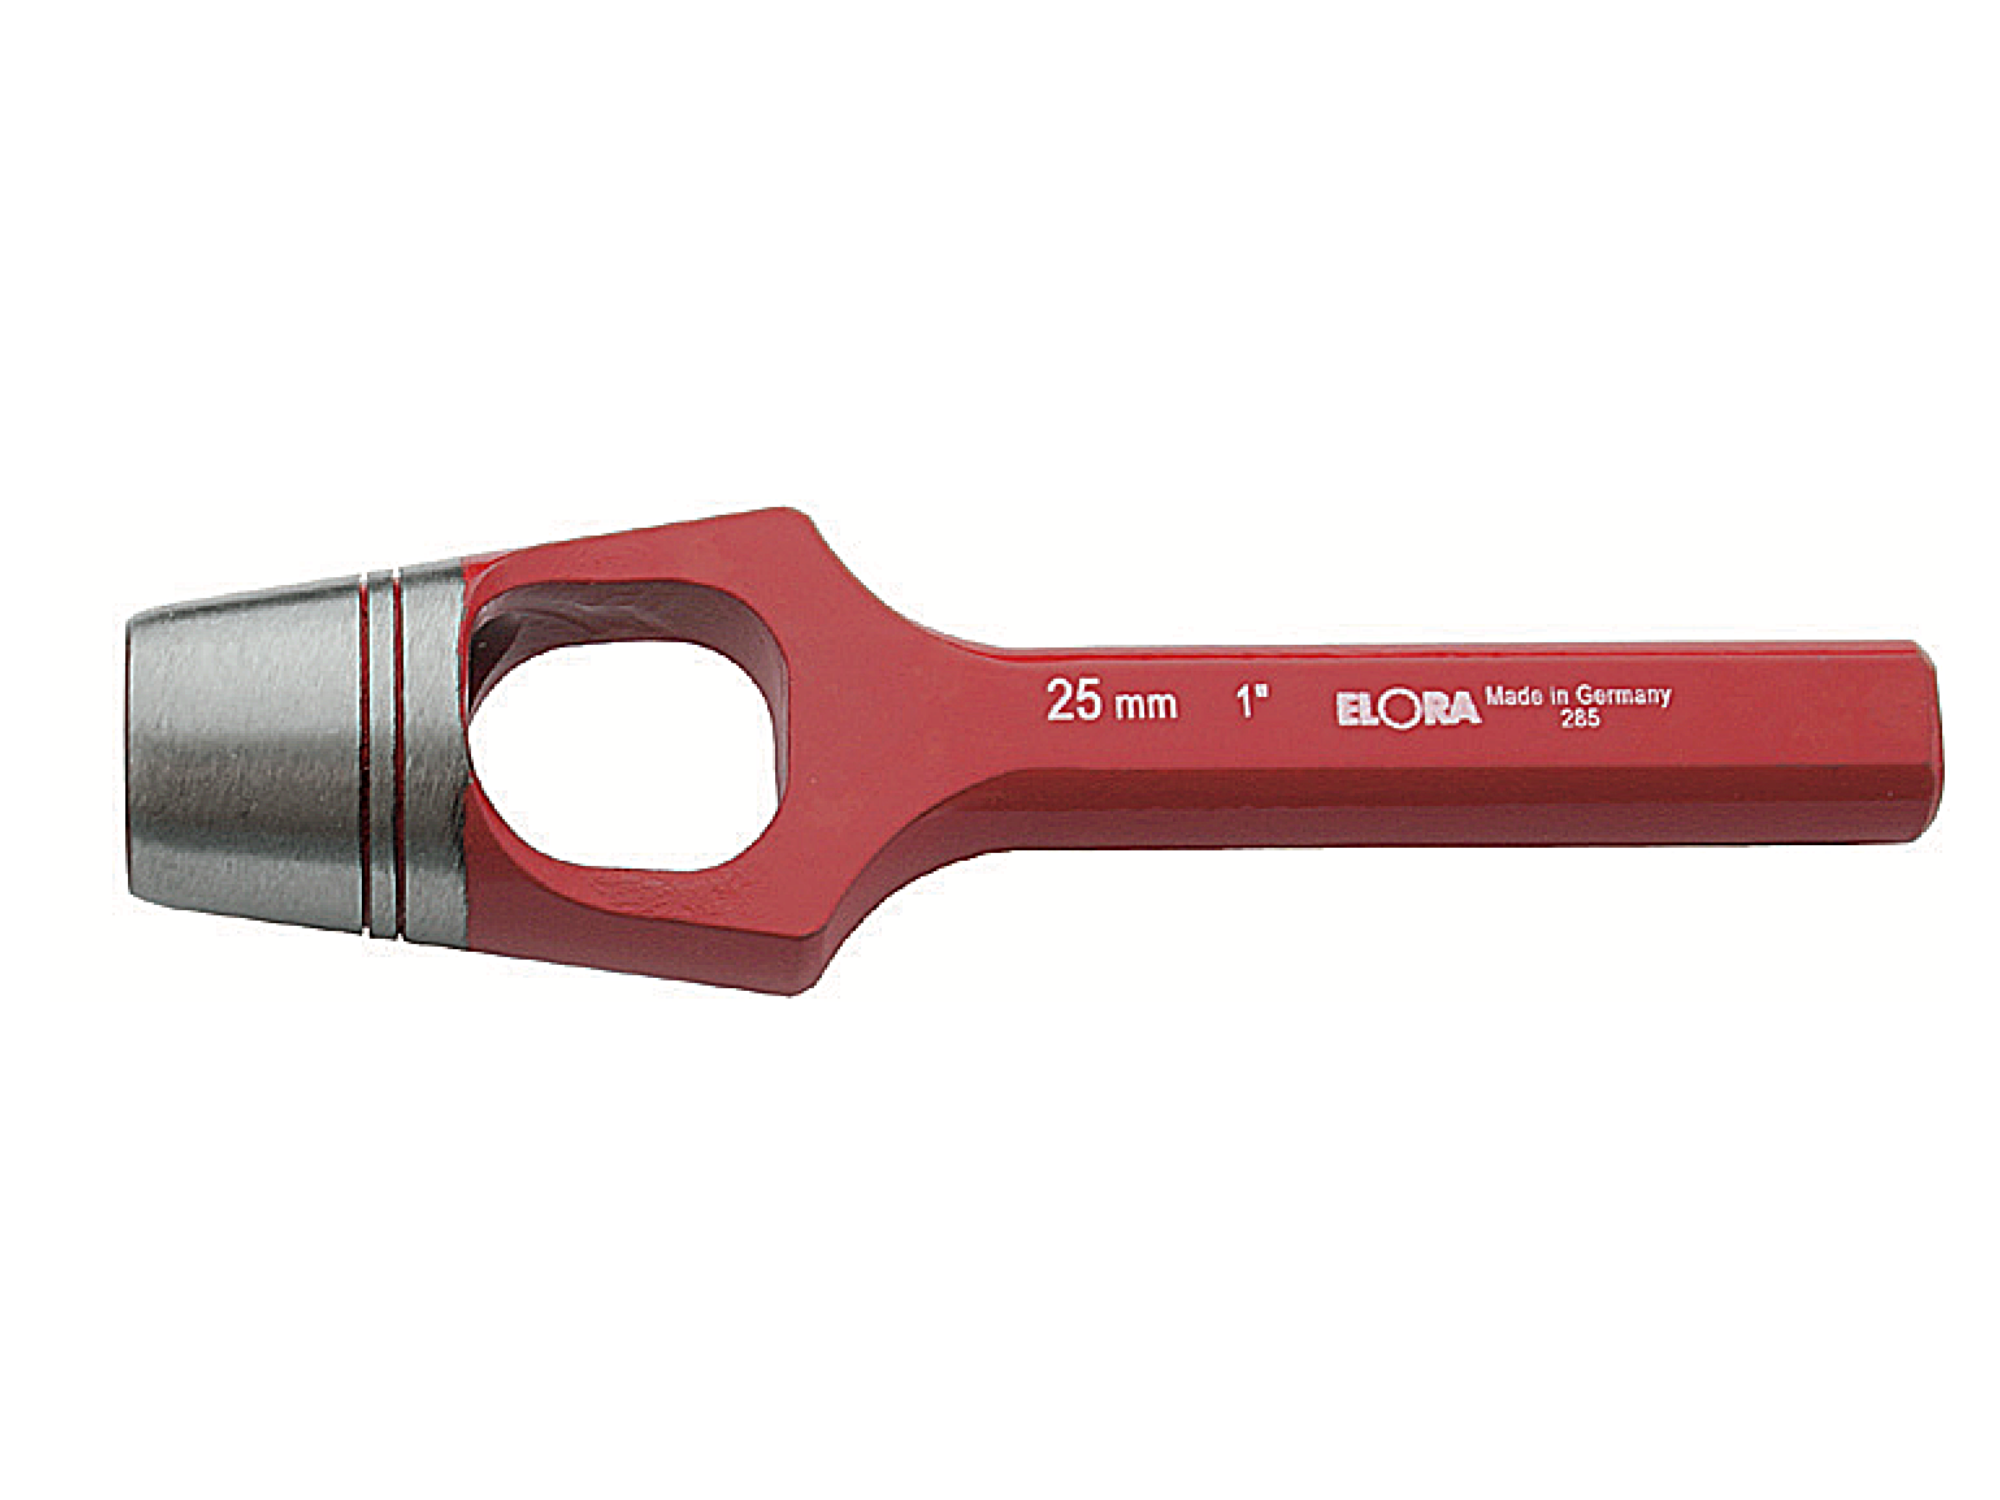 ELORA 285-32-61 Wad Punch Shaft Red 190-260mm (ELORA Tools) - Premium Wad Punch from ELORA - Shop now at Yew Aik.